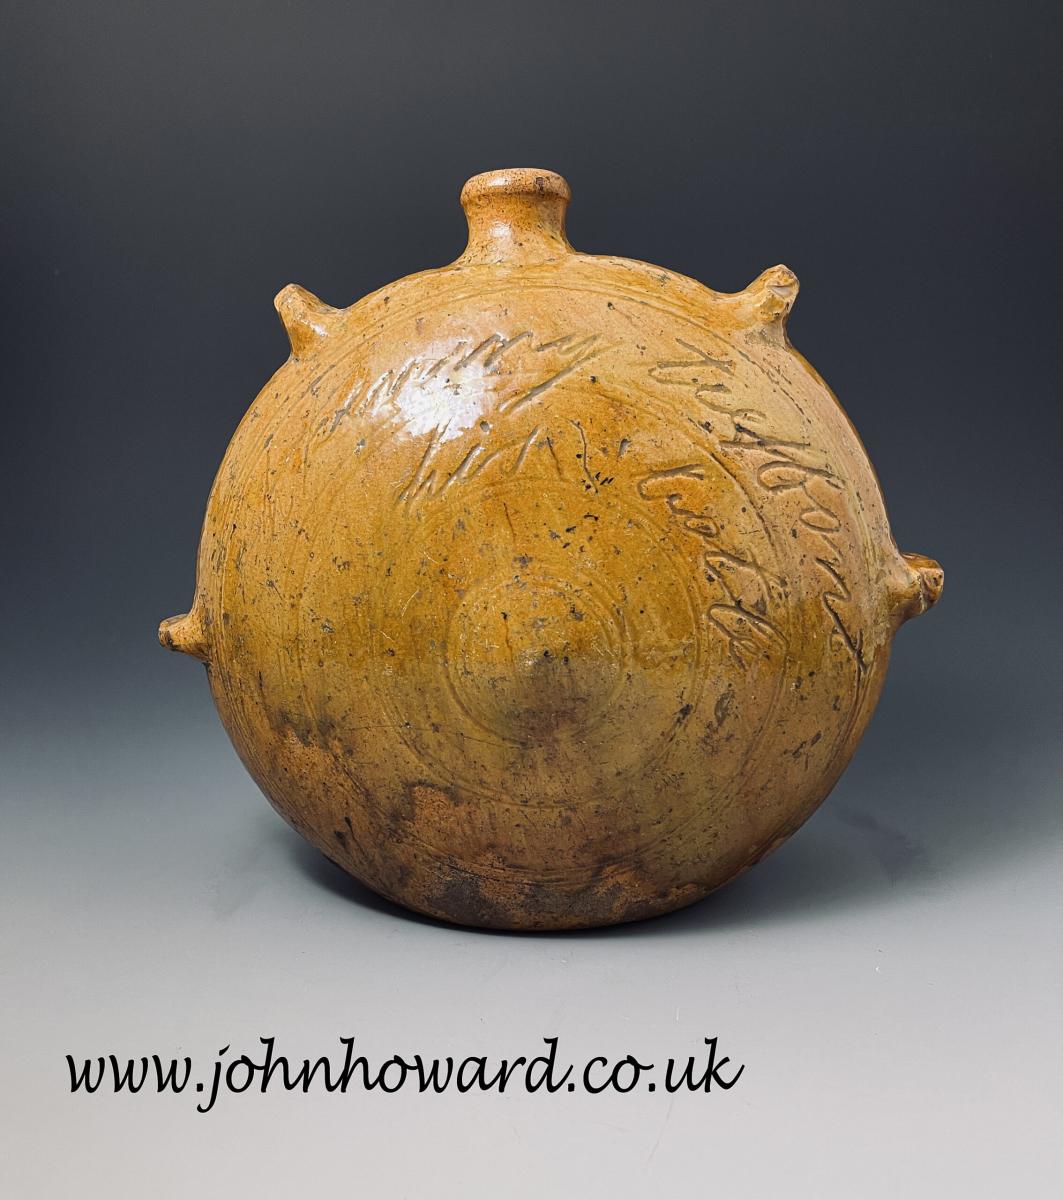 Verwood earthenware slipware costrel named and dated by the maker John Andrew 1871